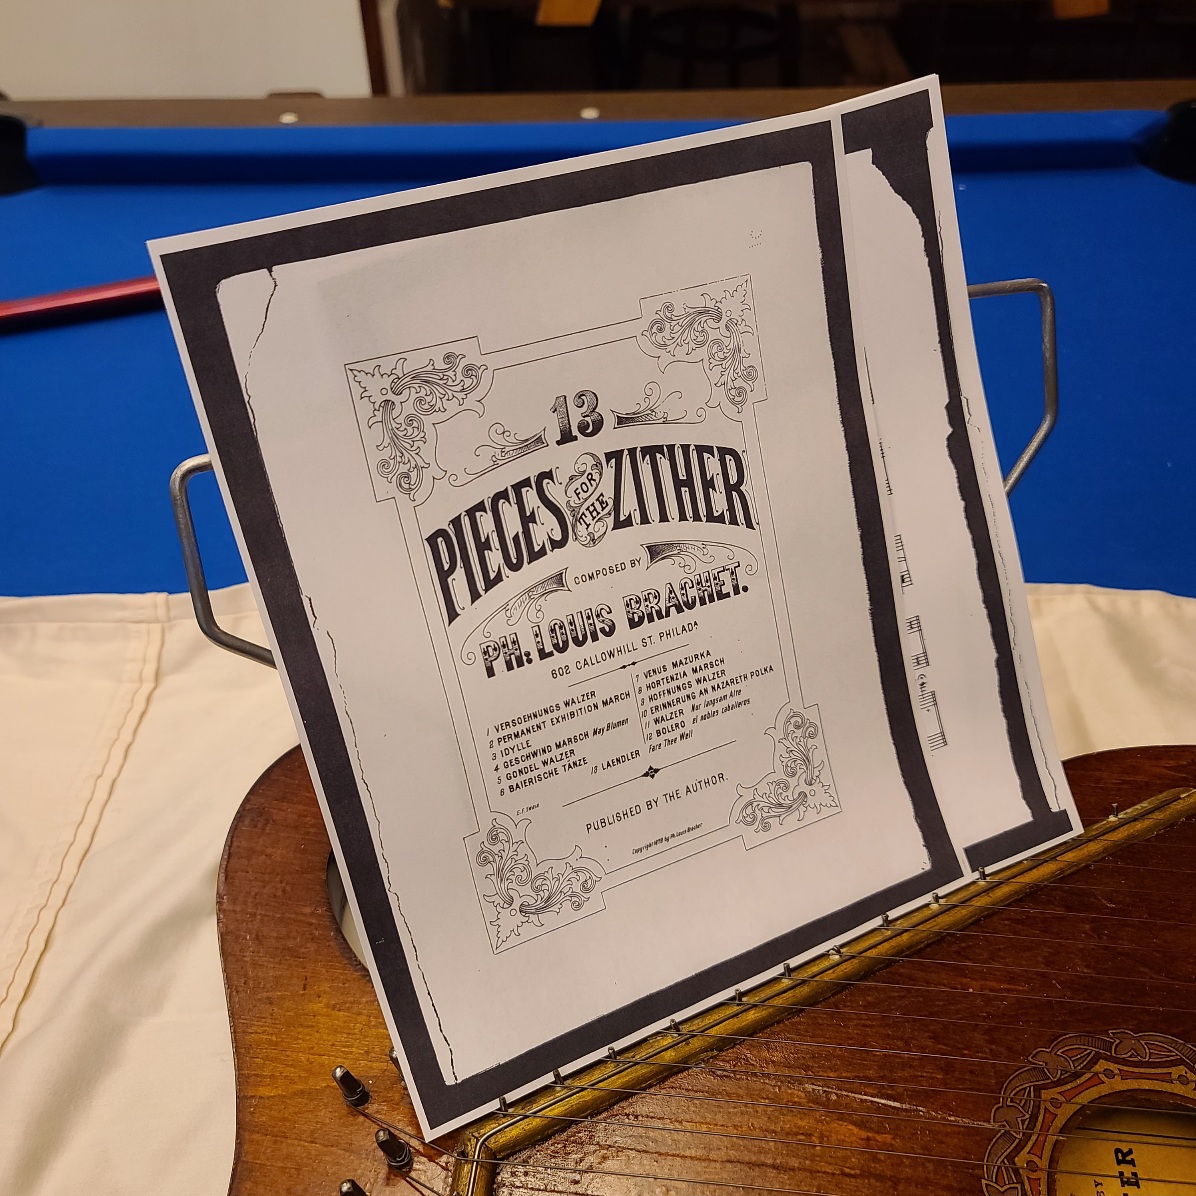 Music stand holding sheet music for playing in the original zither position.